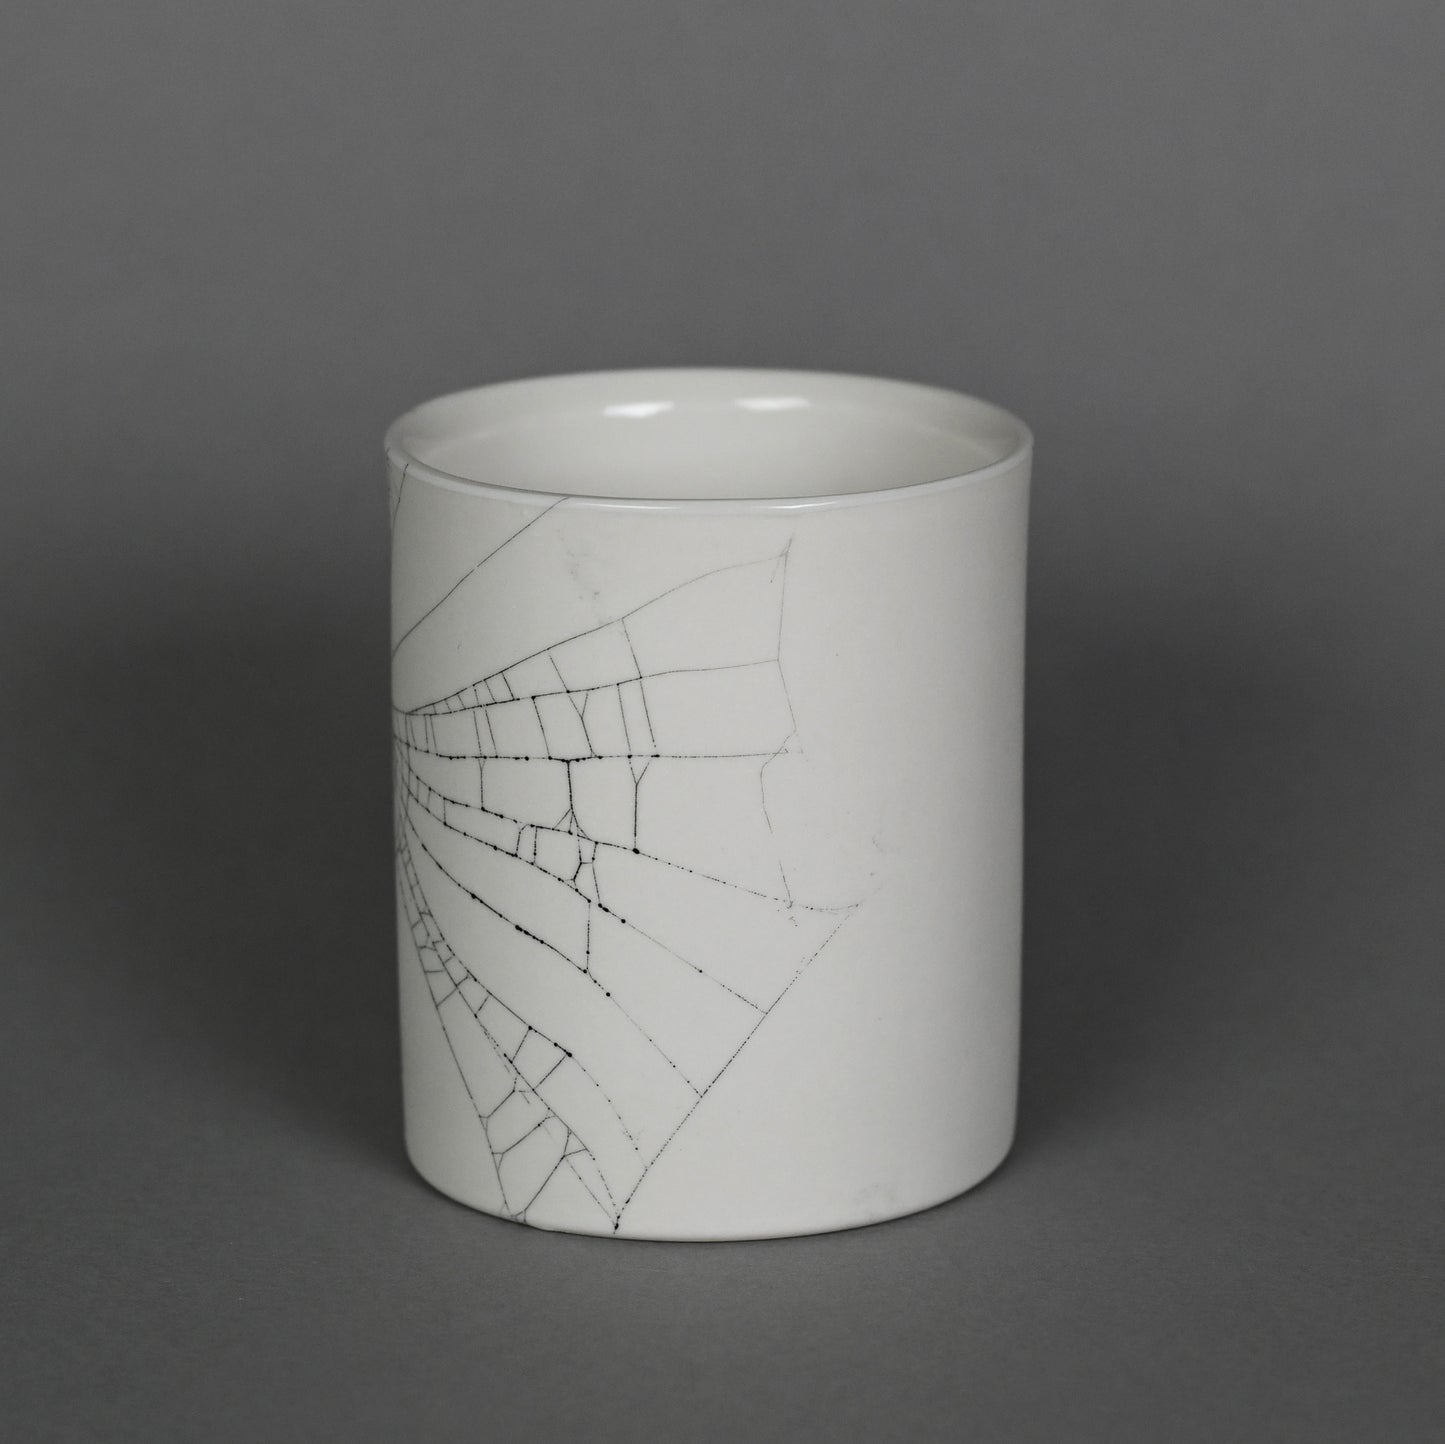 Web on Clay (209), Collected September 30, 2022